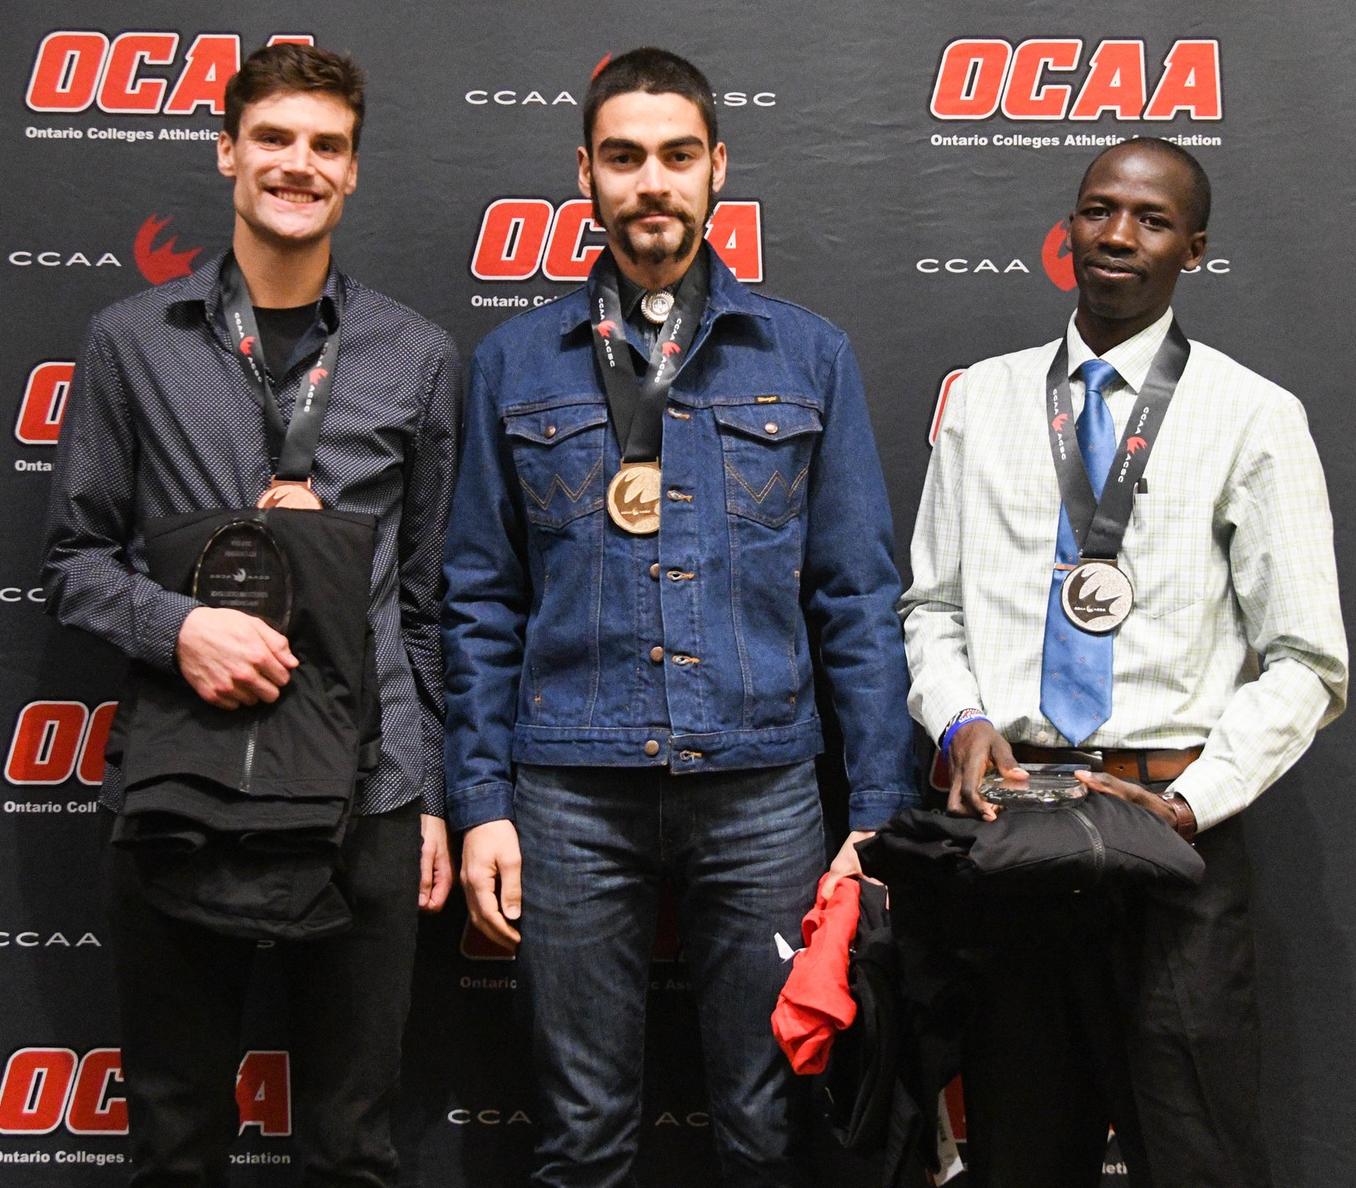 Chesoo Earns CCAA Silver Medal at Cross Country Nationals